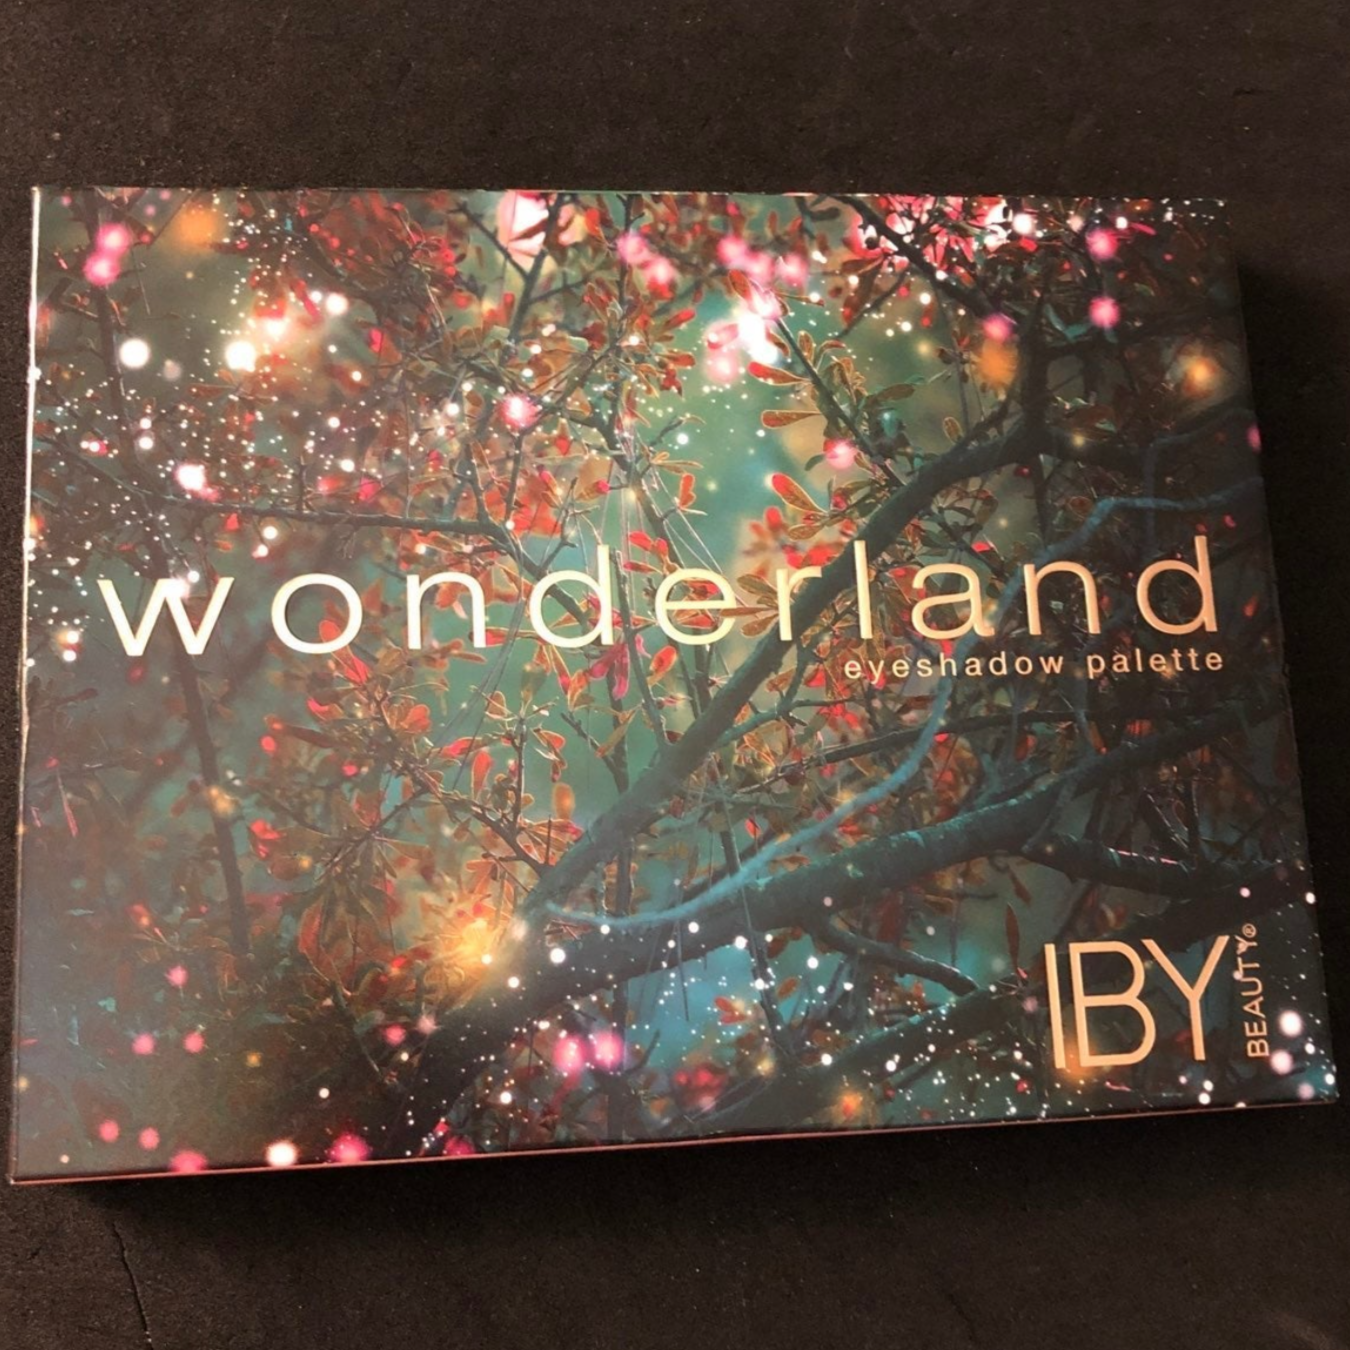 Find magic in every little moment with this palette packed with out-of-this-world, Wonderland-inspired eyeshadow shades. Whether you're glamming it for a night on the town or it's just another mellow Monday, these whimsical hues are sure to cast a spell—no magic wand required.